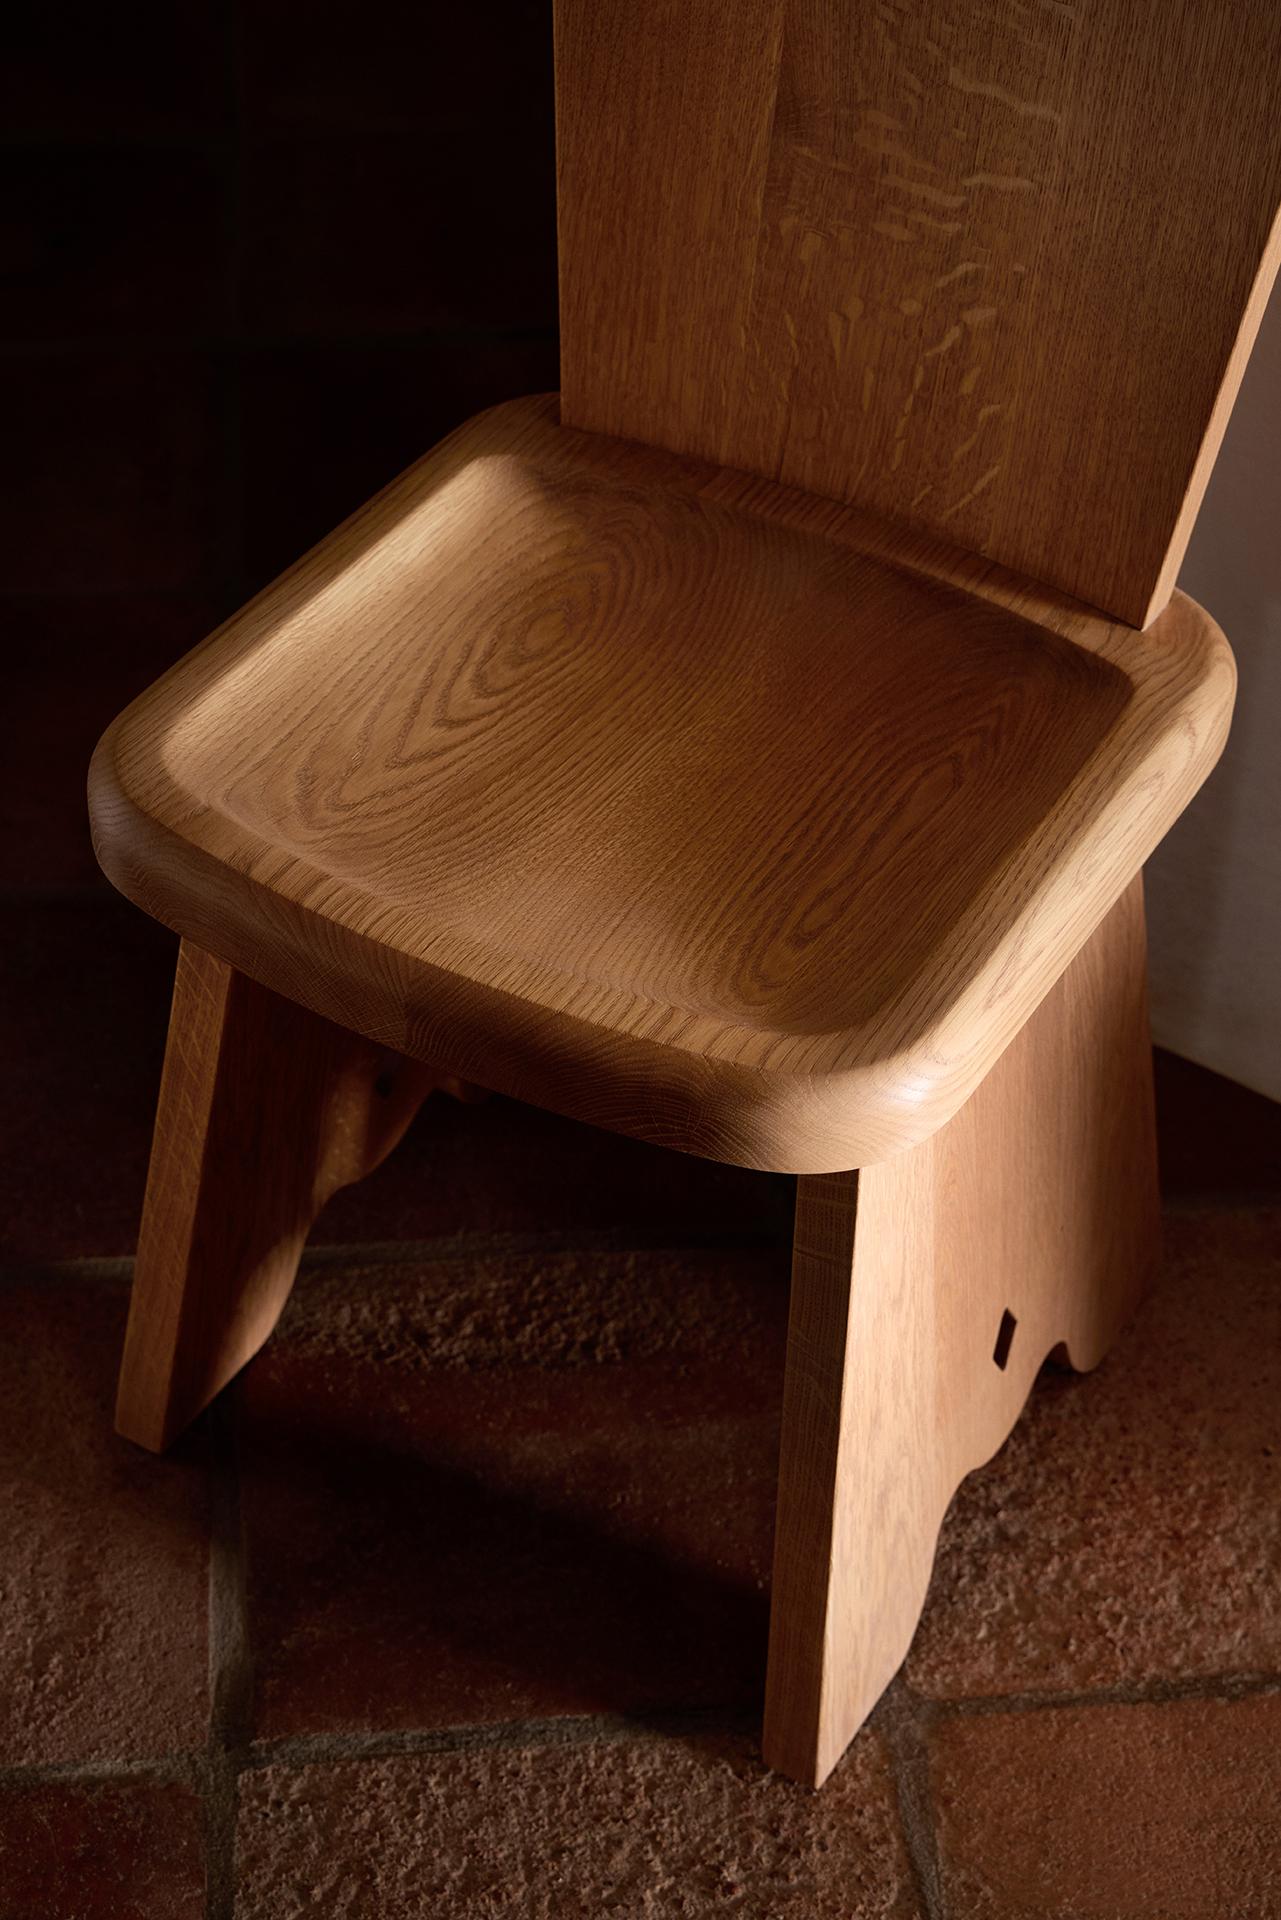 Rambling Chair in Natural French Oak Wood by Yaniv Chen for Lemon For Sale 5